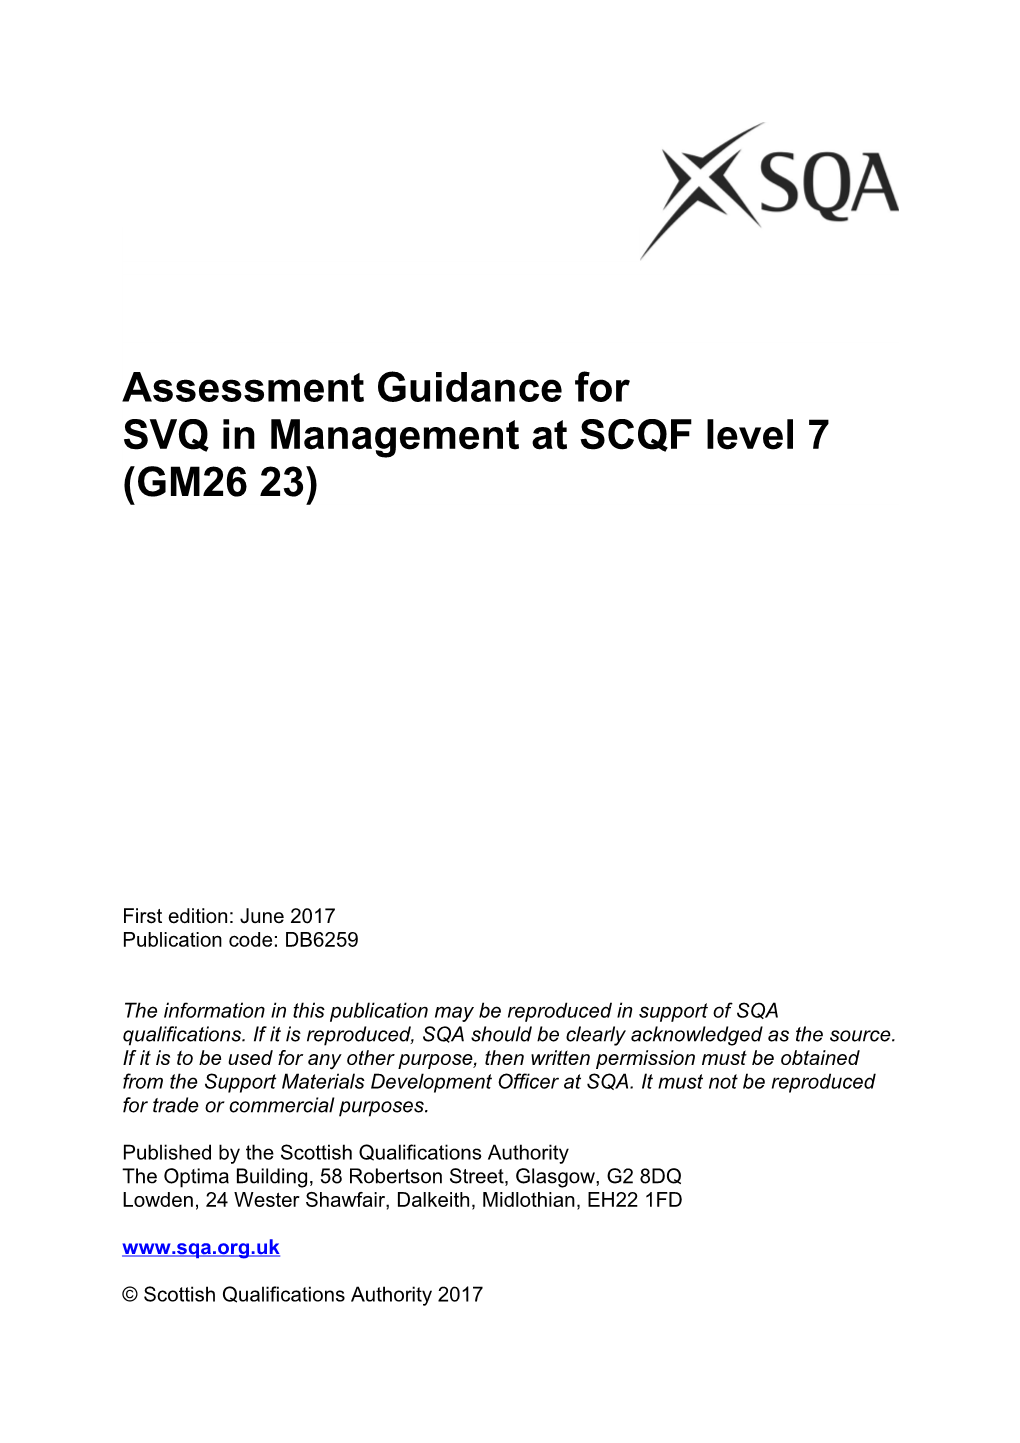 Assessment Guidance for SVQ in Management at SCQF Level 7 (GM26 23)